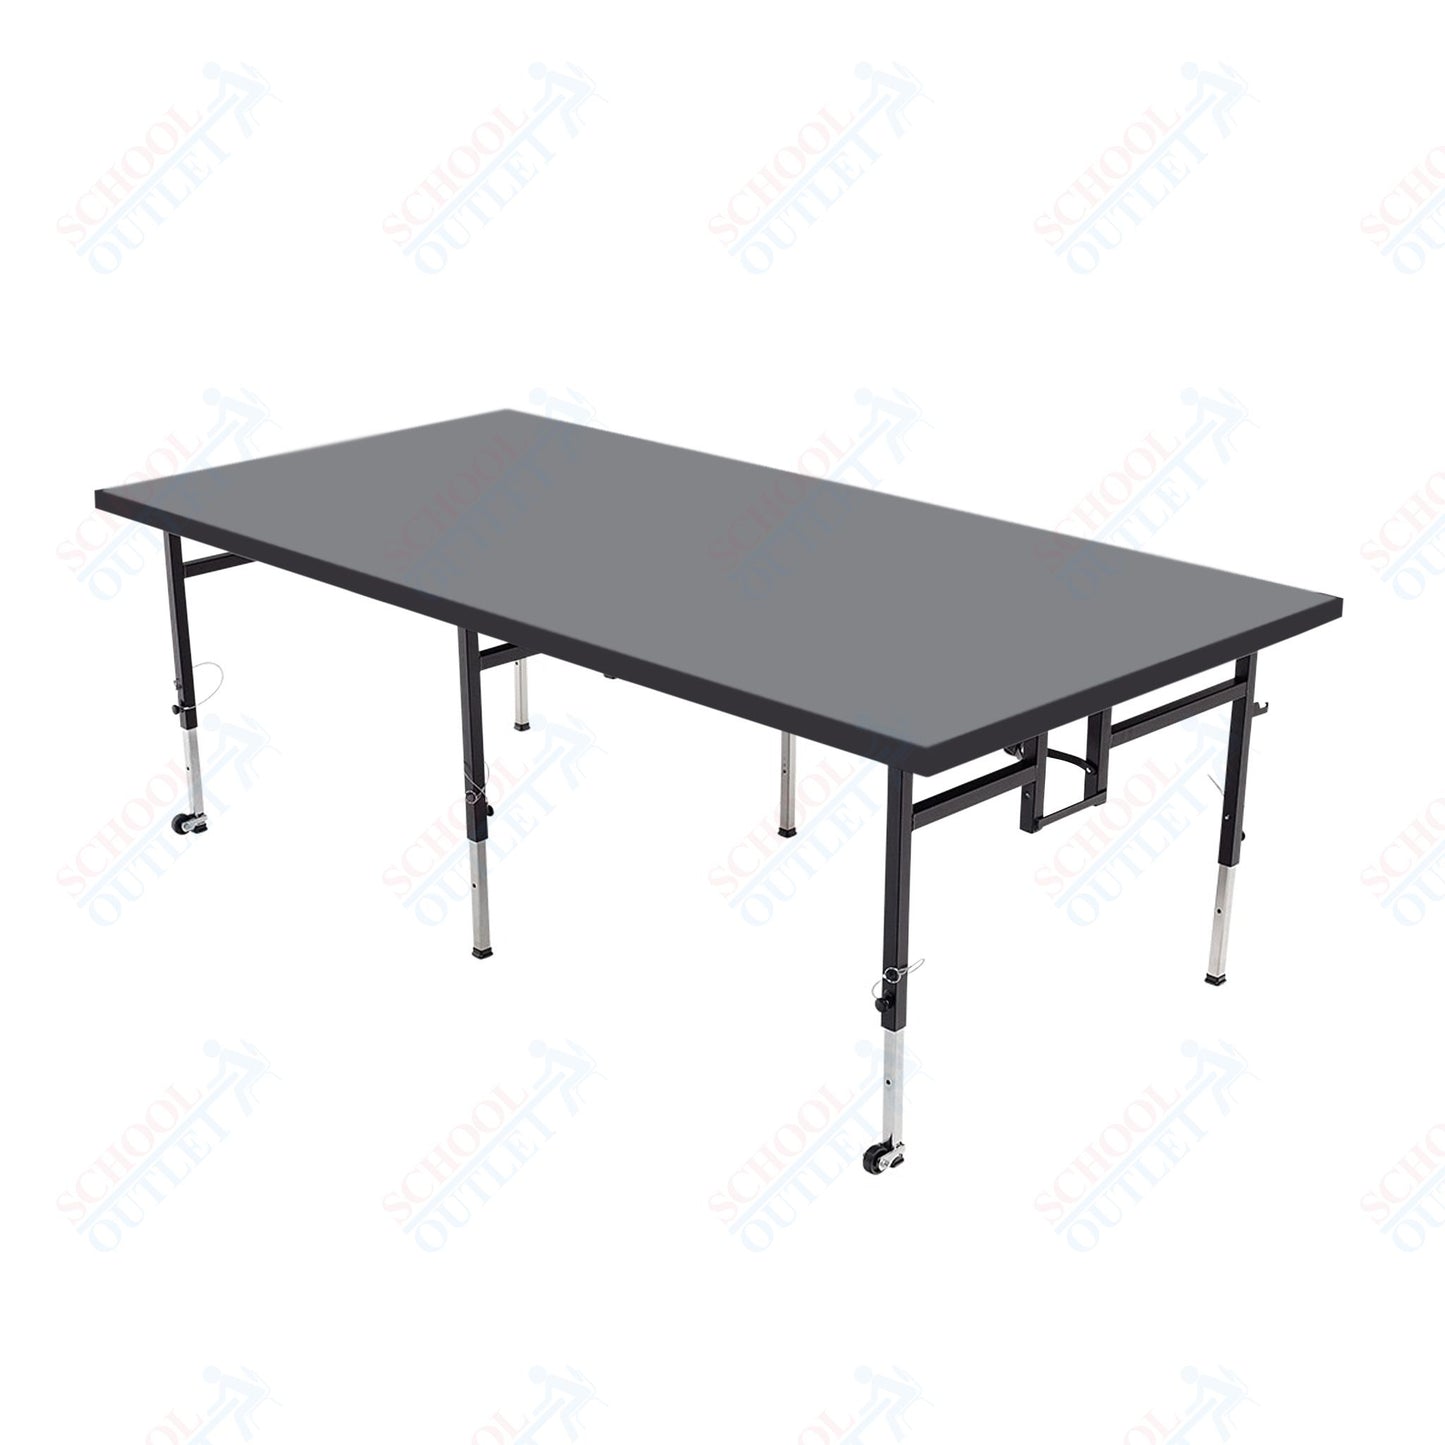 AmTab Adjustable Height Stage - Polypropylene Top - 48"W x 96"L x Adjustable 16" to 24"H  (AmTab AMT-STA4816P)